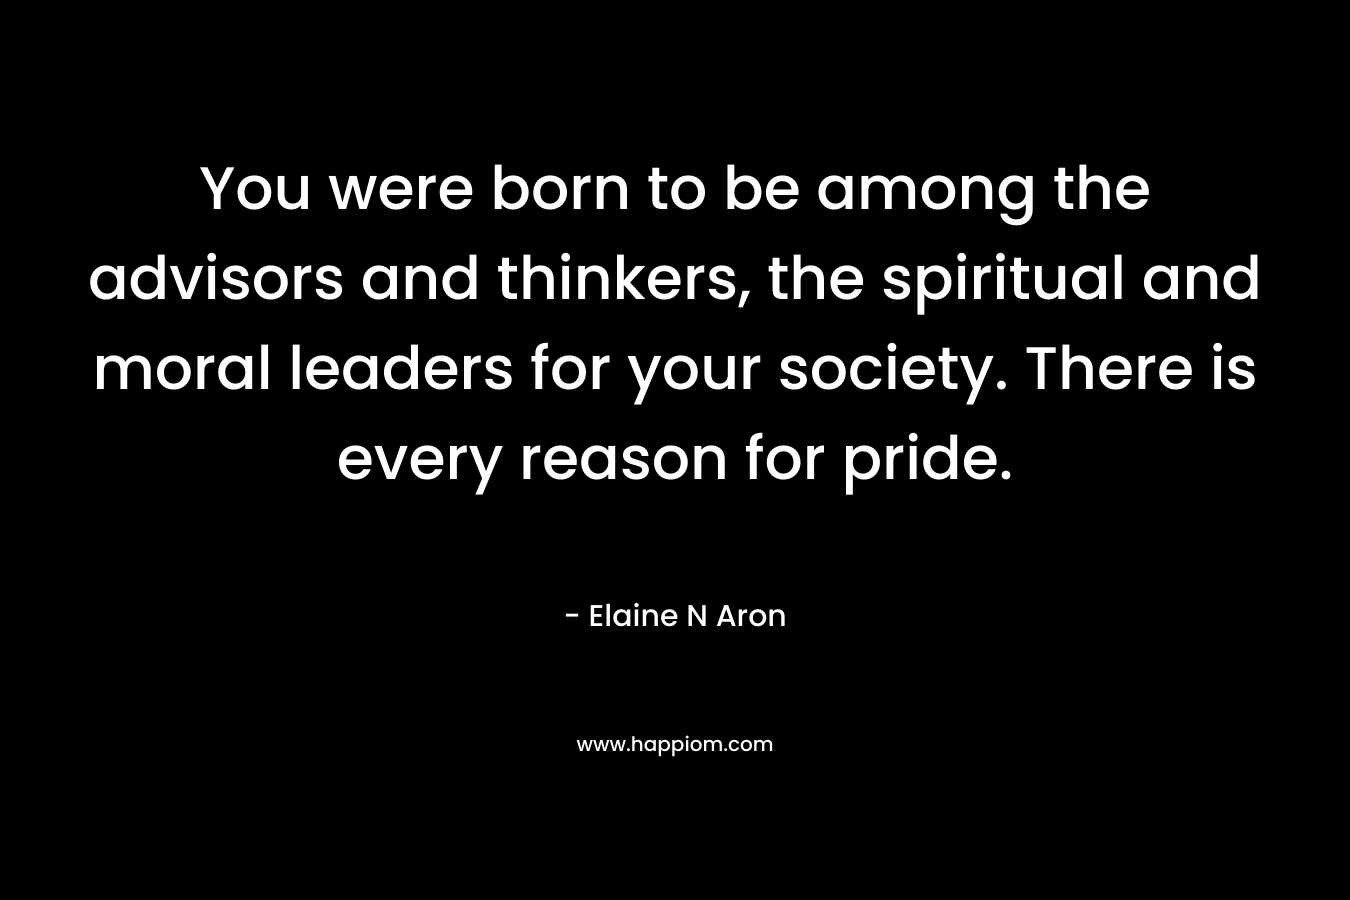 You were born to be among the advisors and thinkers, the spiritual and moral leaders for your society. There is every reason for pride.